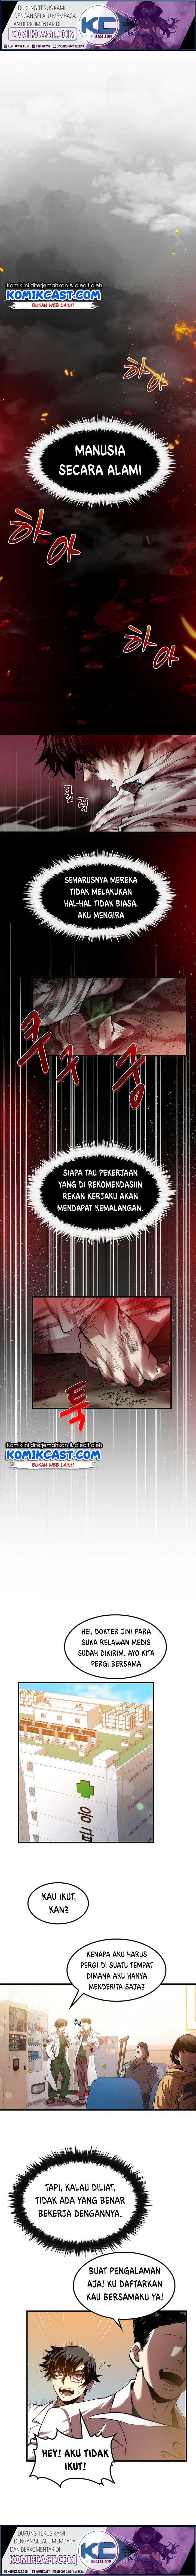 Doctor’s Rebirth Chapter 01 2